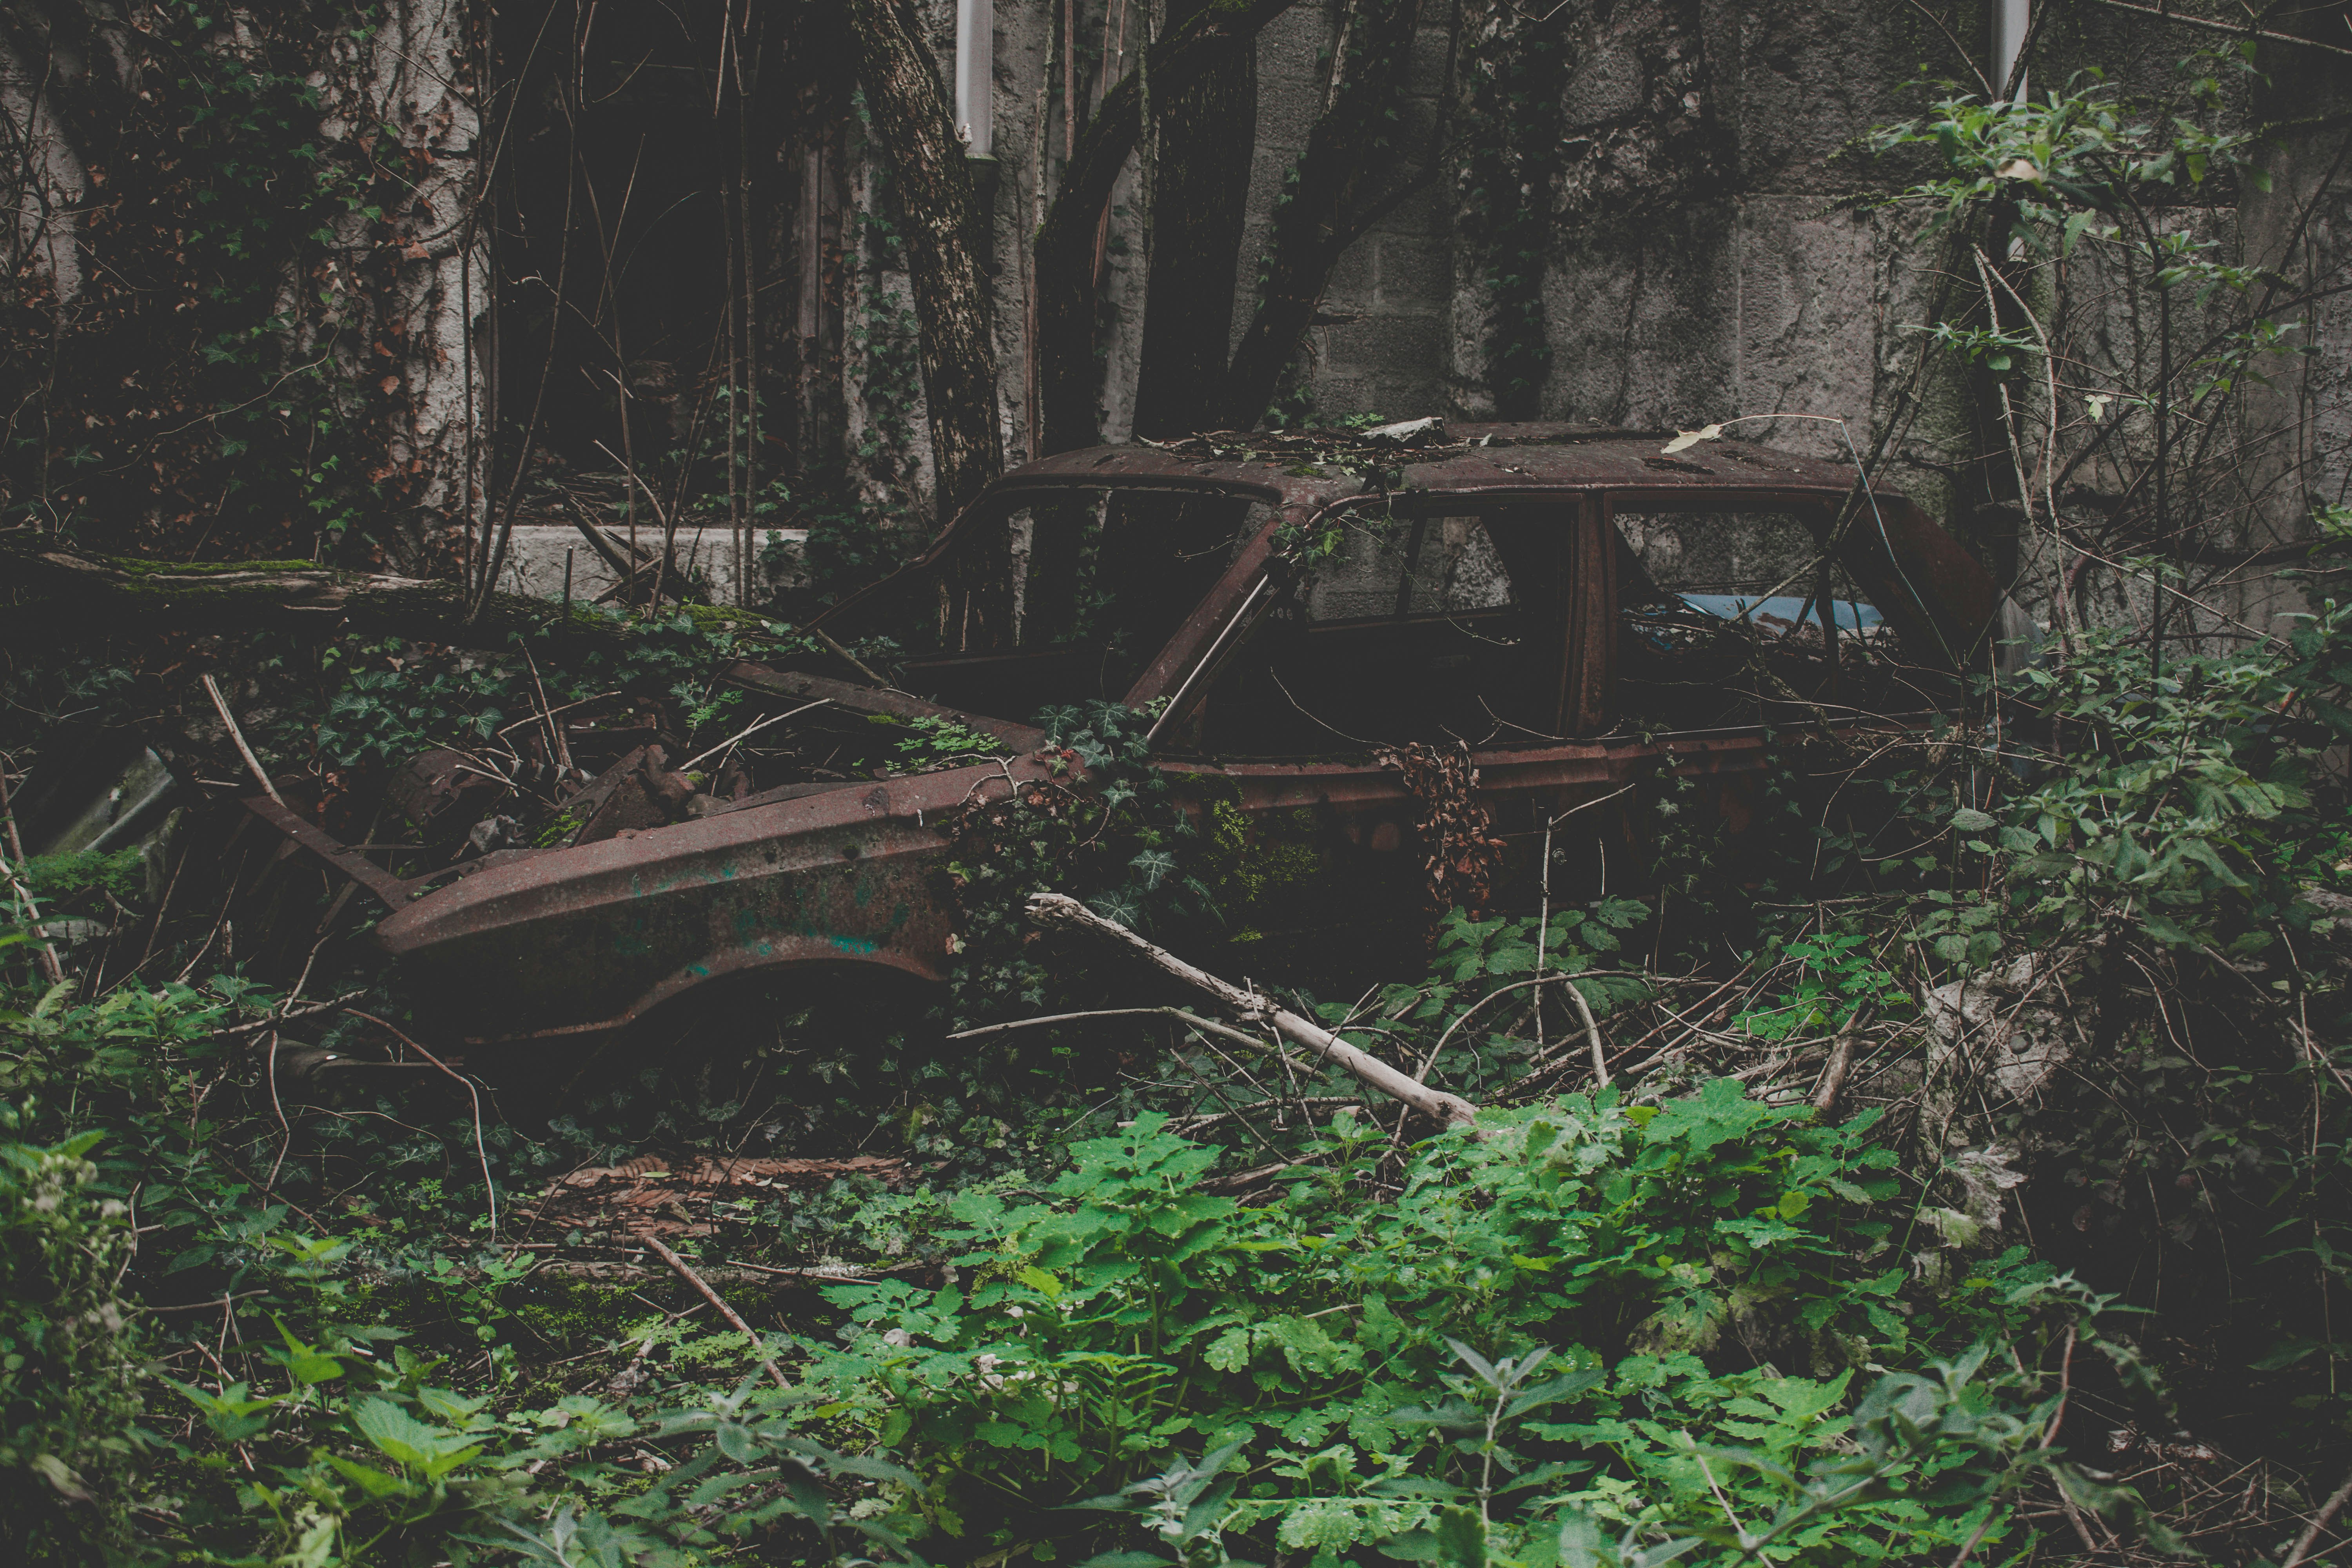 Mixing with nature, and becoming one with her, a car hides.
Abandoned here for years, it disappears little by little, lost behind ever denser greenery.